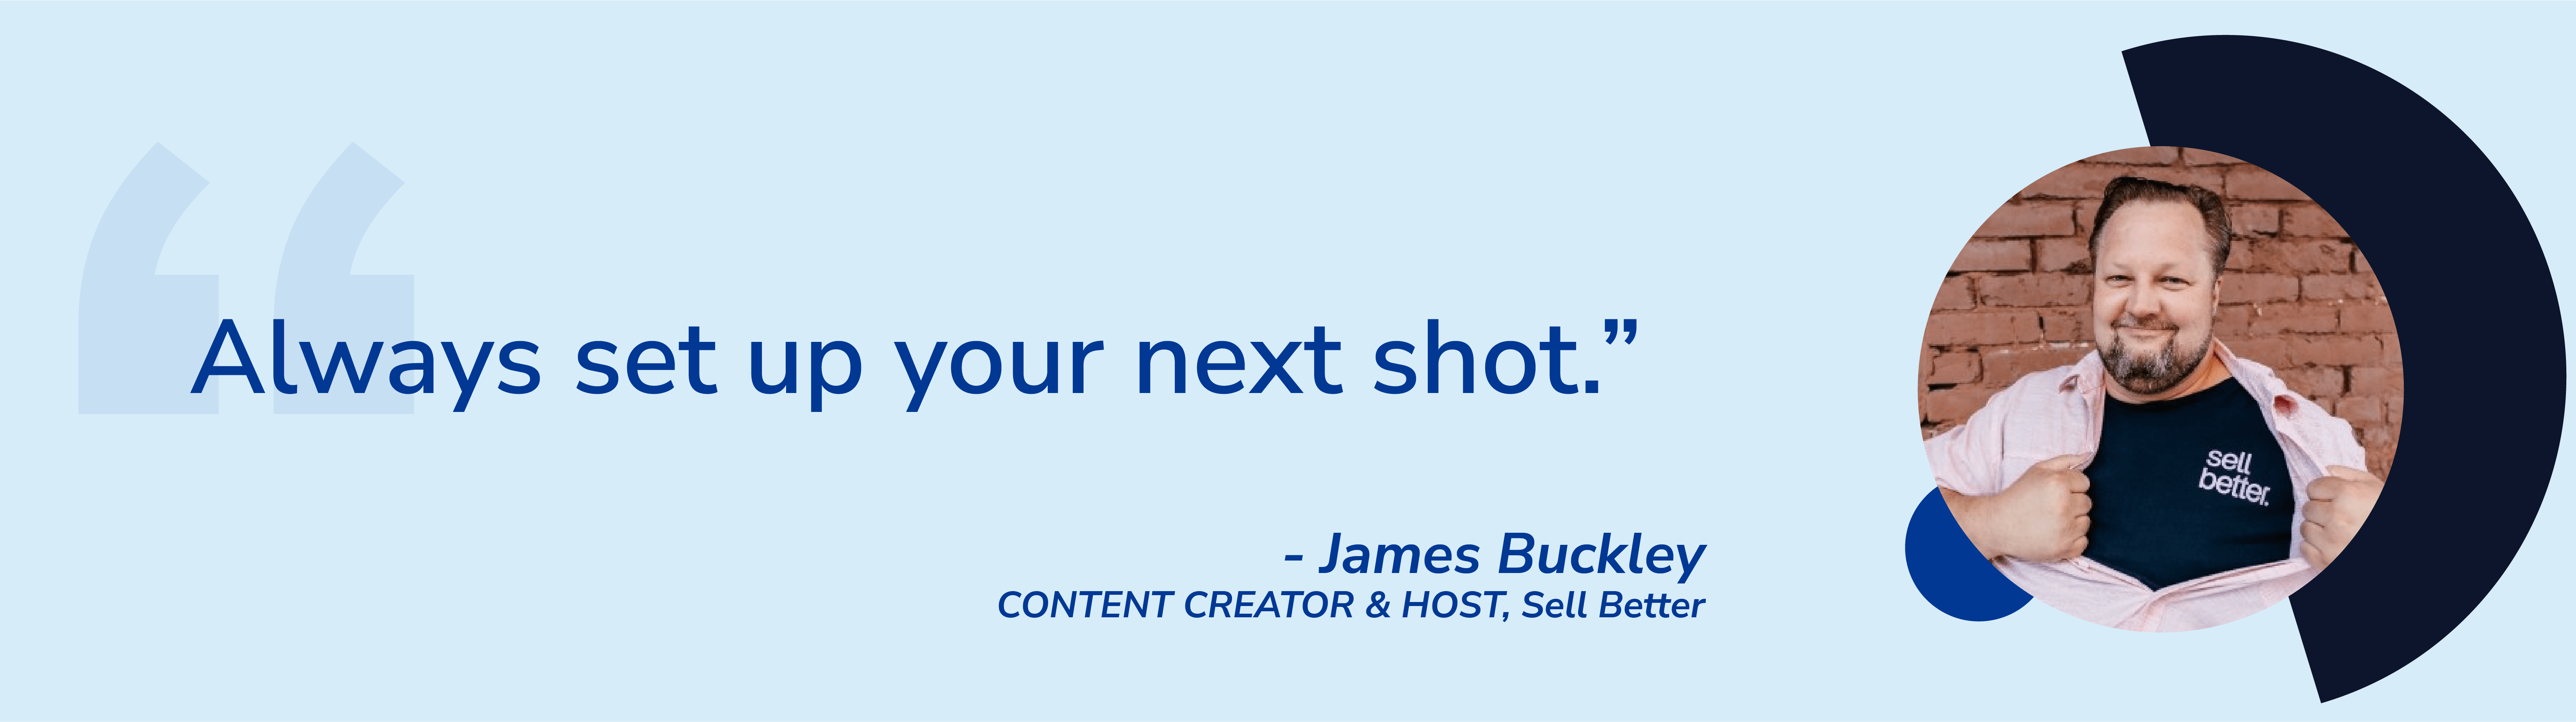 Tips From Top Sales Experts - James Buckley